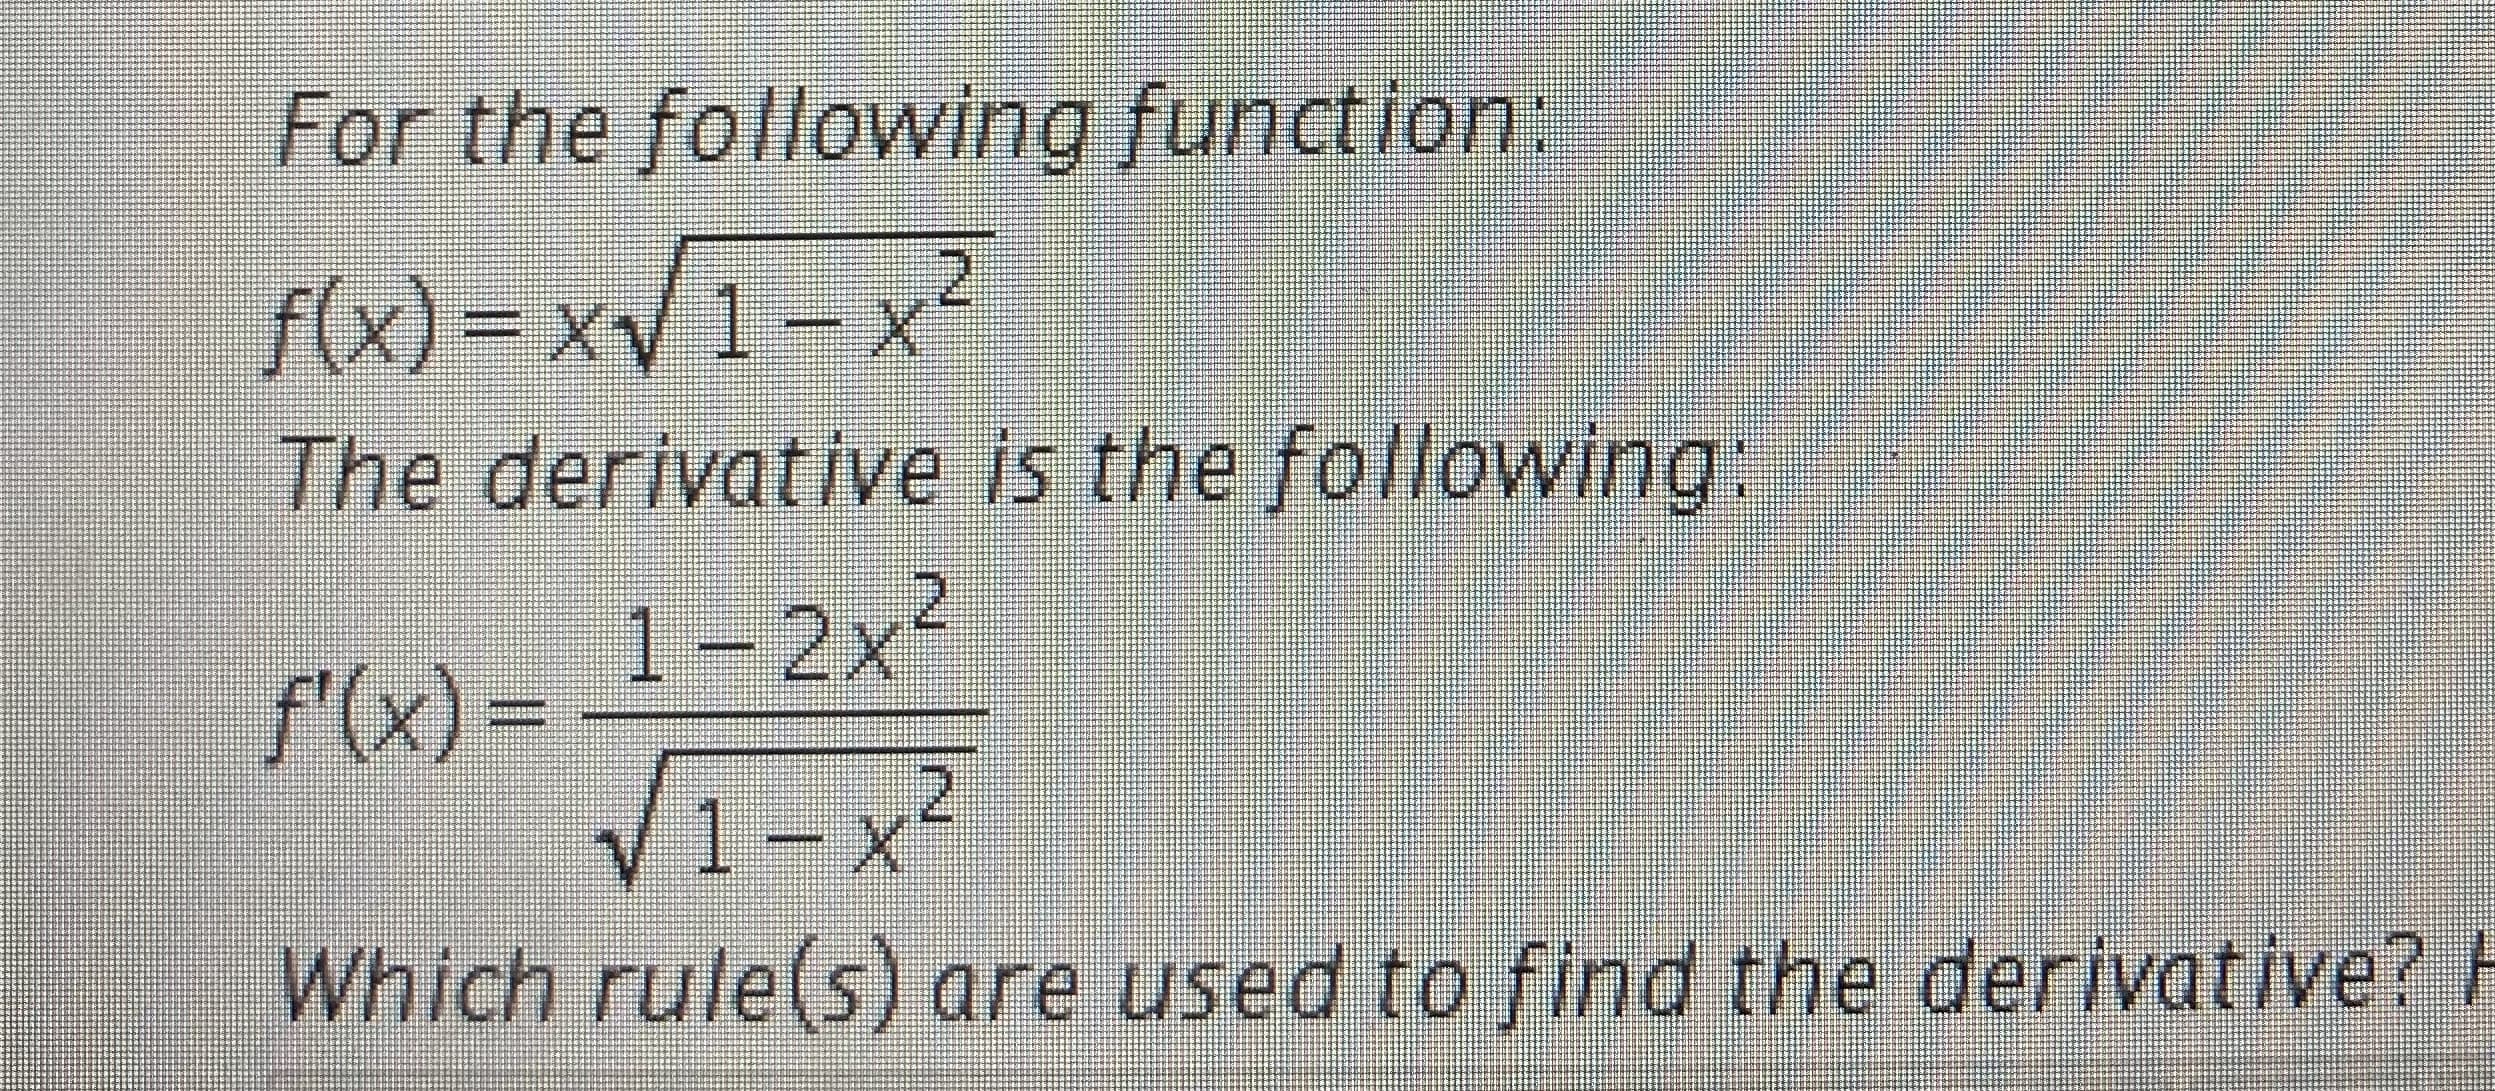 Which rule(s) are used to find the derivative?
